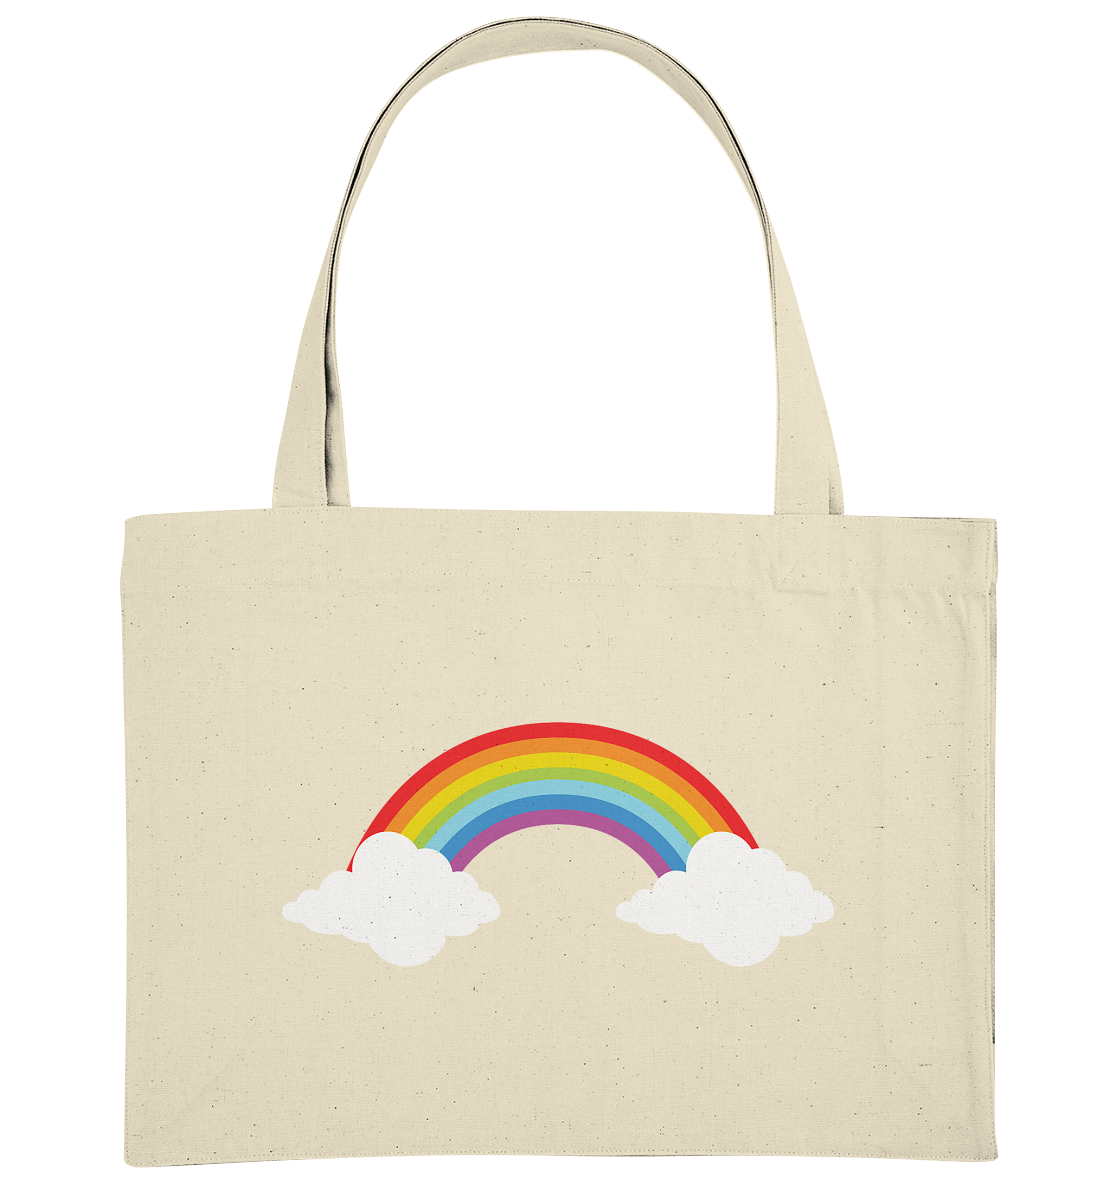 Rainbow with clouds - organic shopping bag